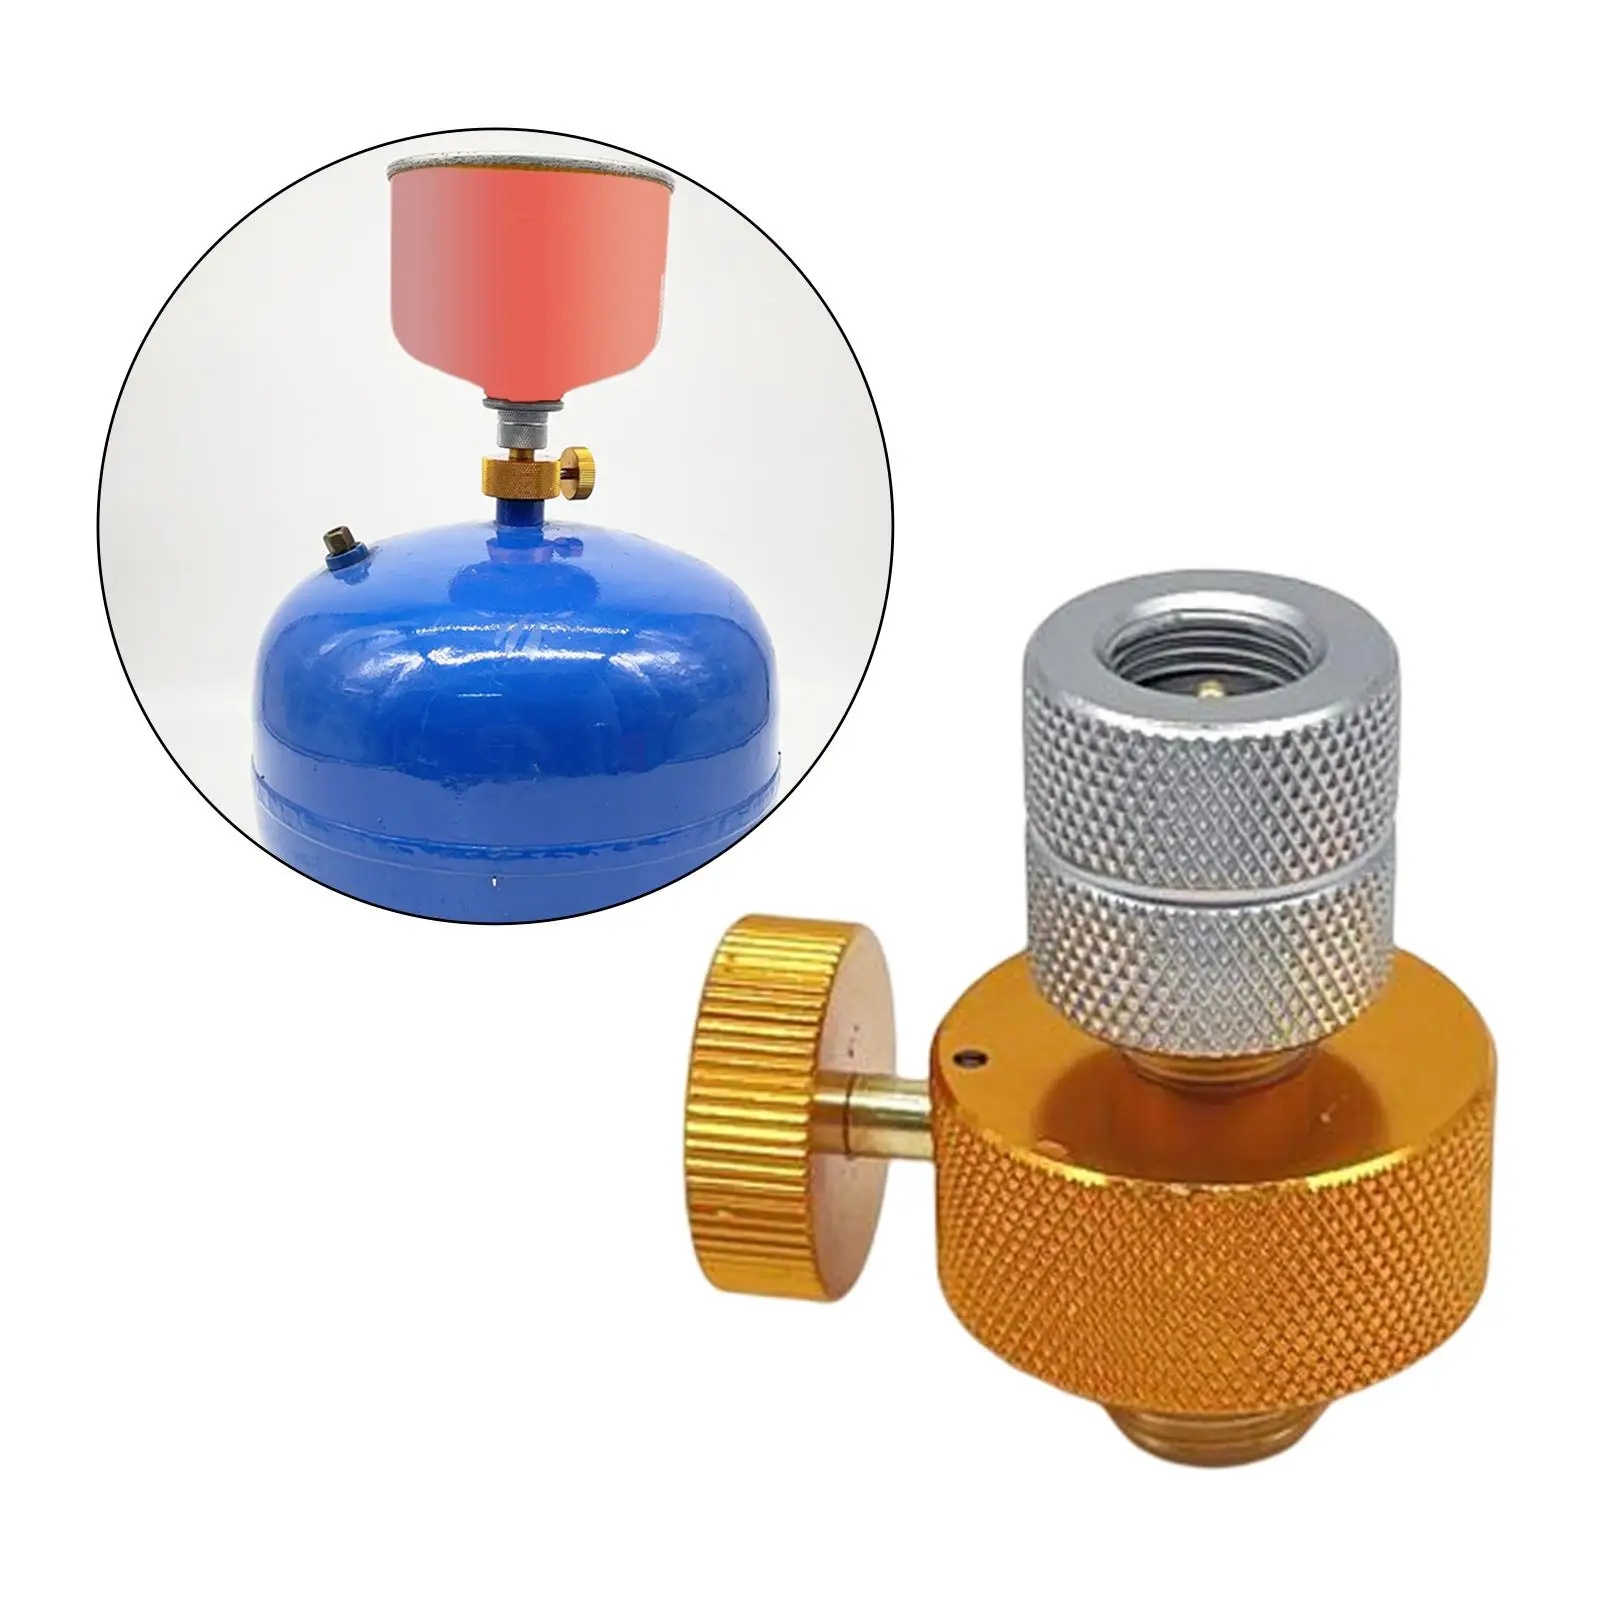 Adaptor Conversion, Furnace Connector, Cylinder Tank Split Type, for Camping Hiking